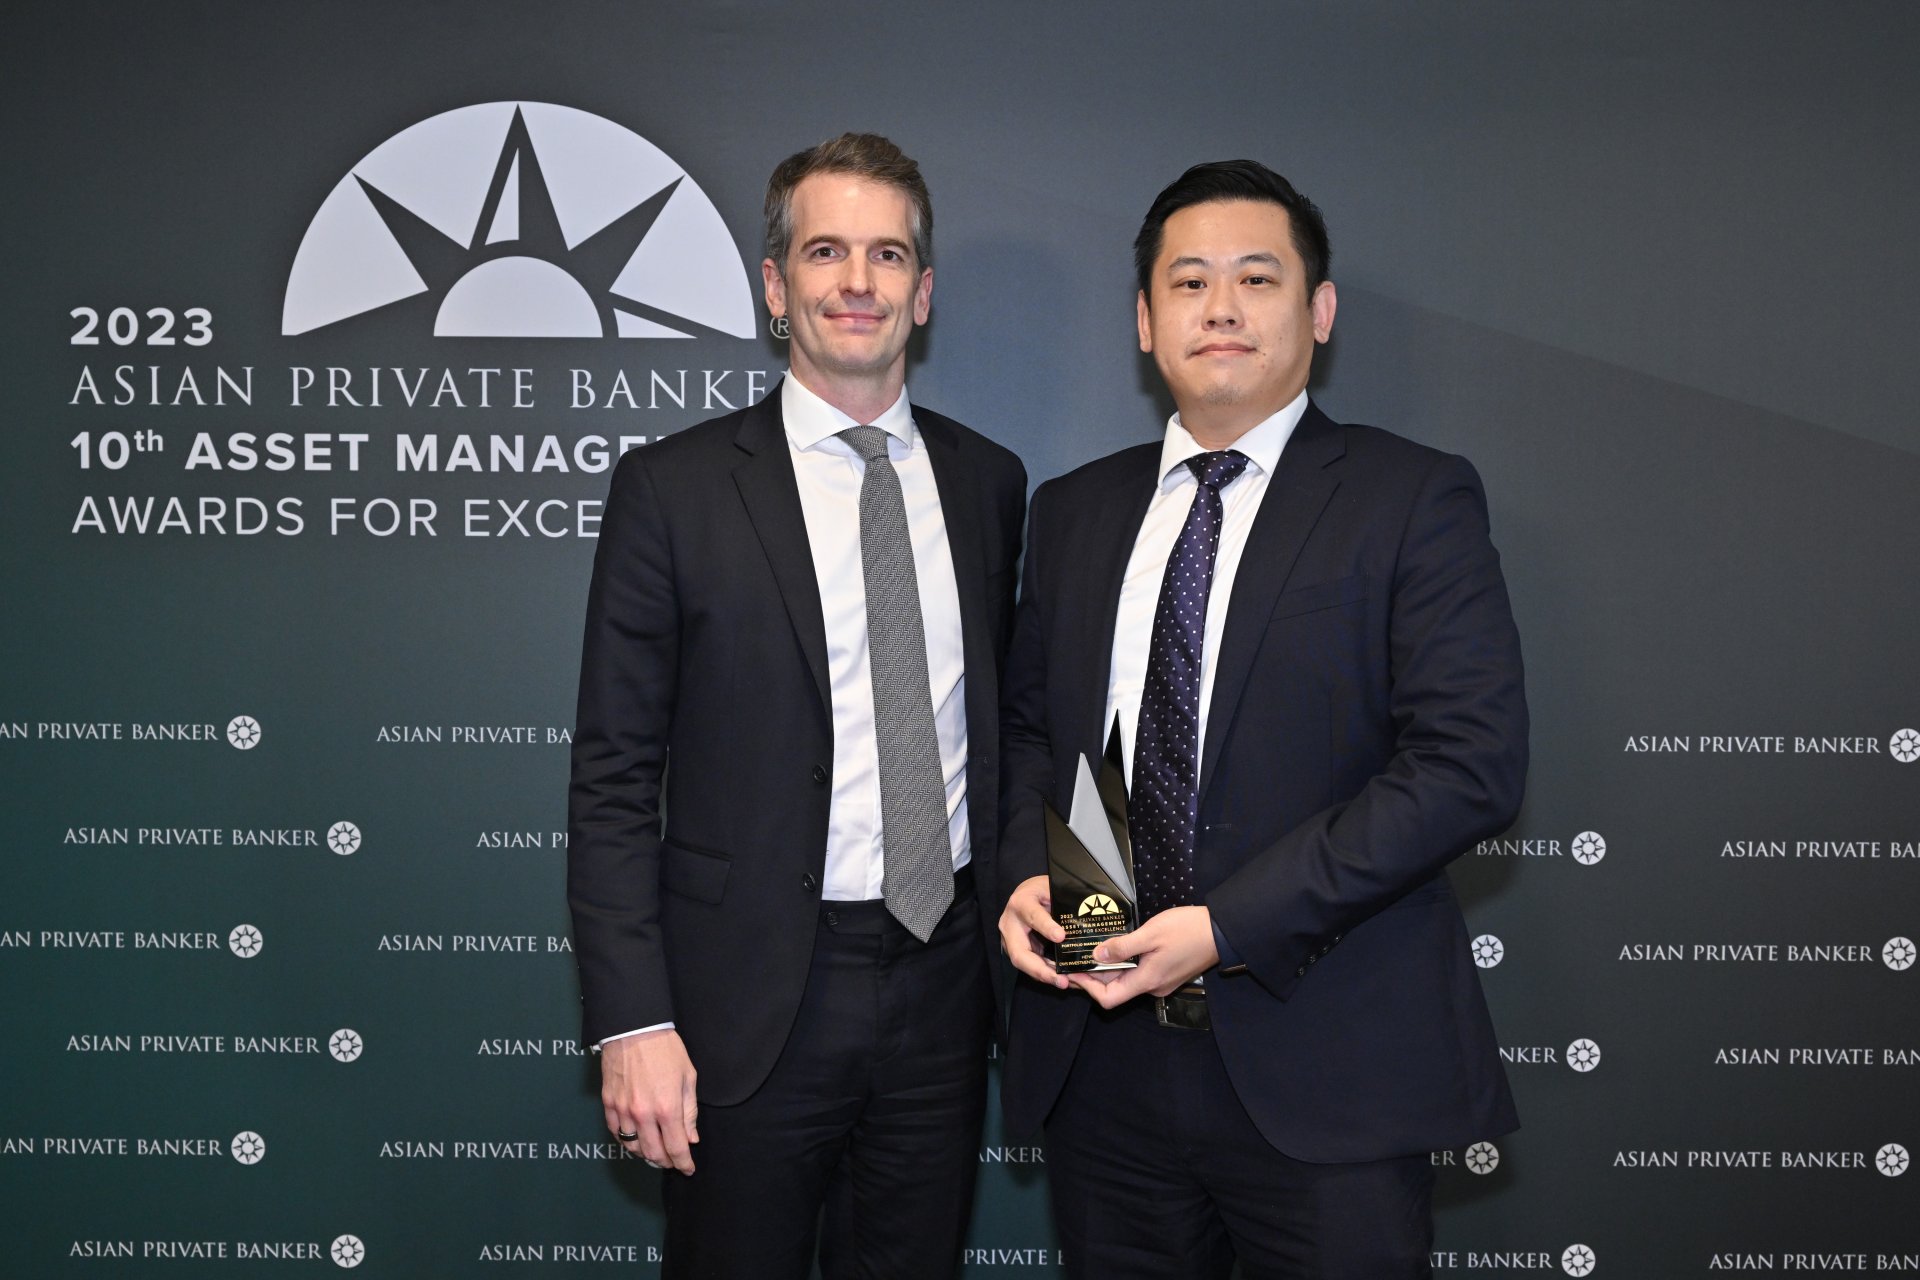 Accepting Portfolio Manager of the Year on behalf of Henry Wong at Asian Private Banker’s 10th Asset Management Awards for Excellence is Robert Gibbs and Osvaldo Kwan